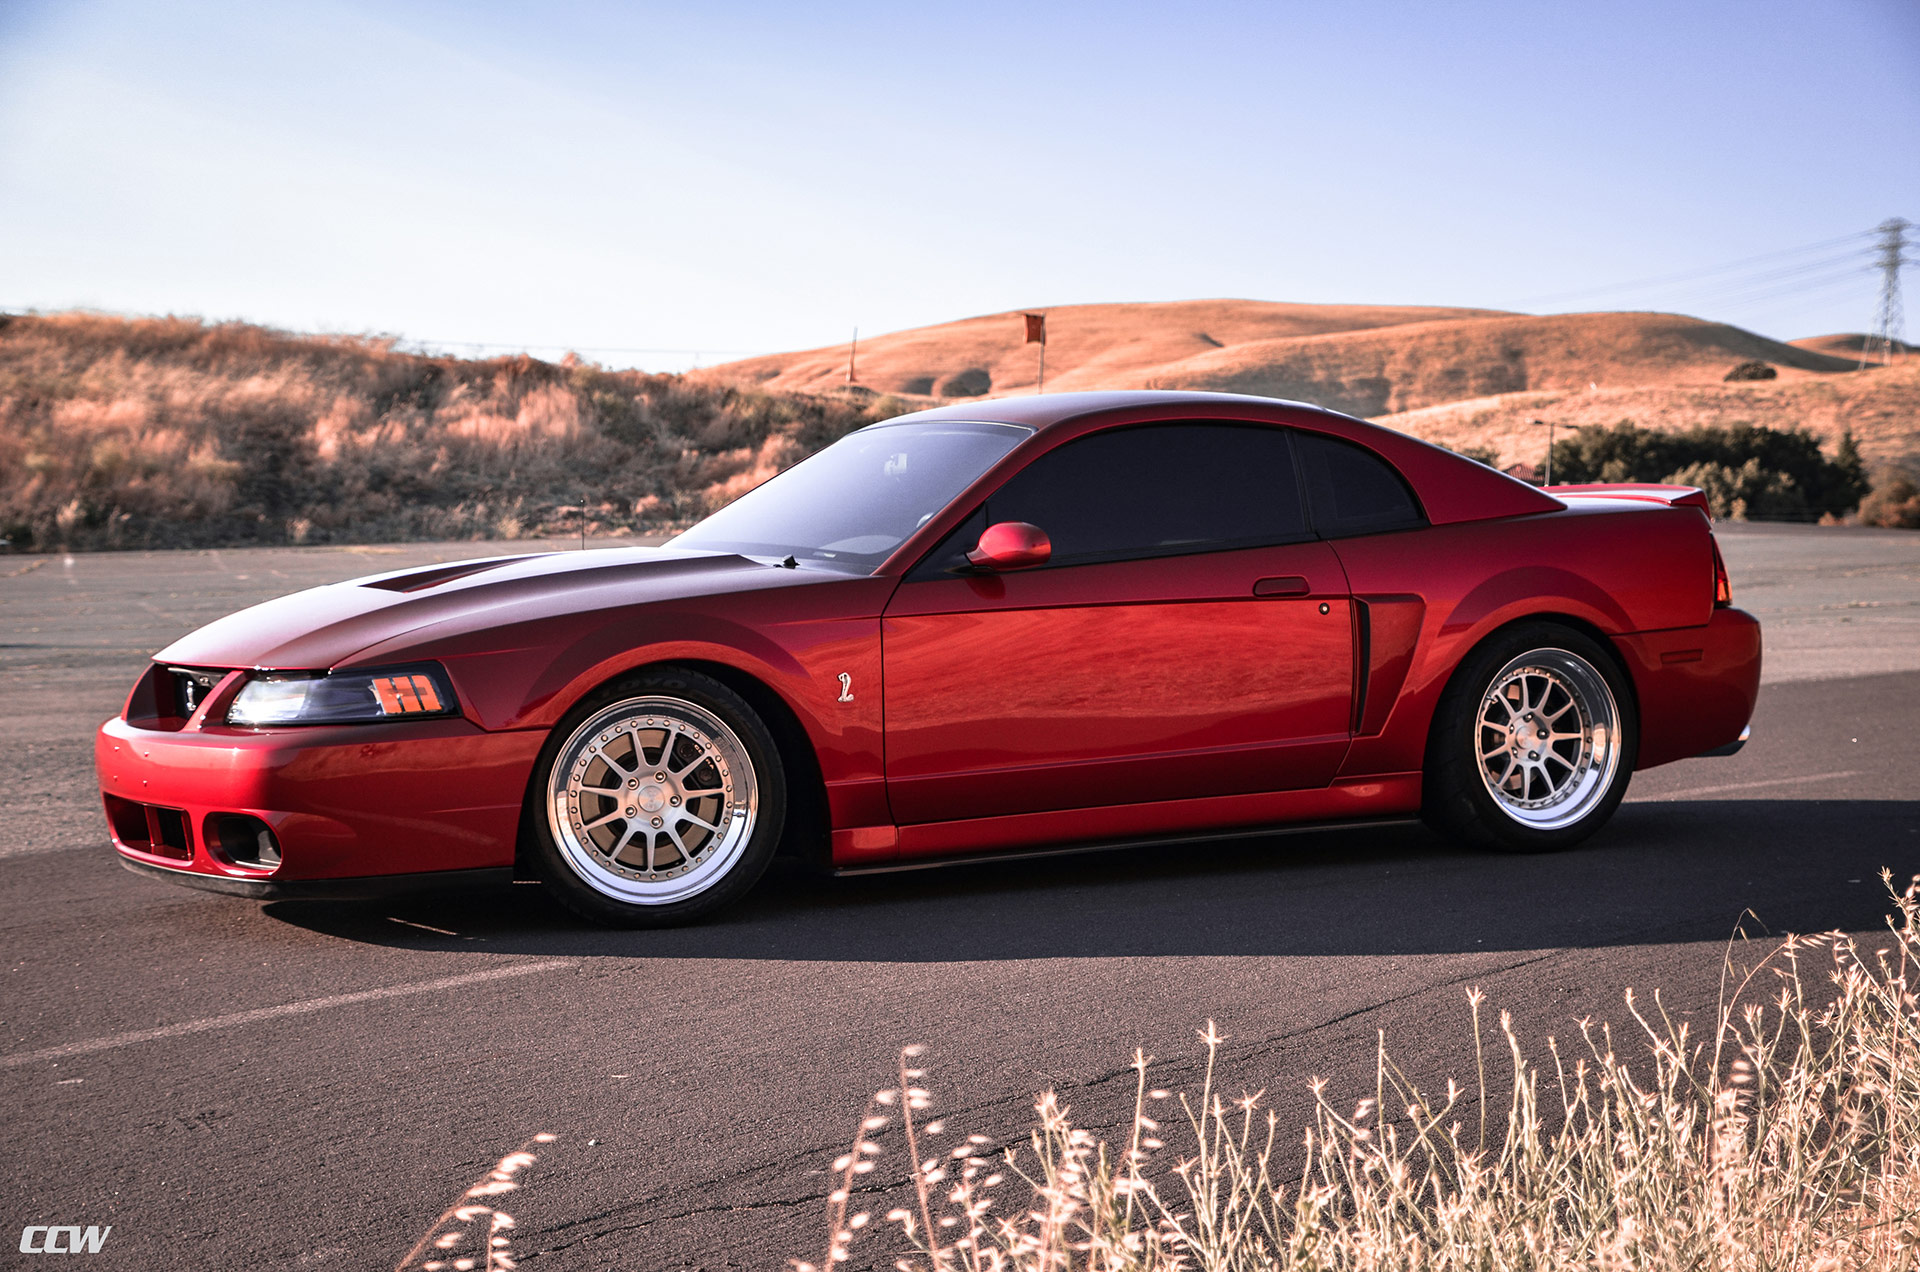 Red Ford Mustang 4th Gen 03 SVT Cobra Terminator - CCW D110 Wheels in Brushed w Polished Lips